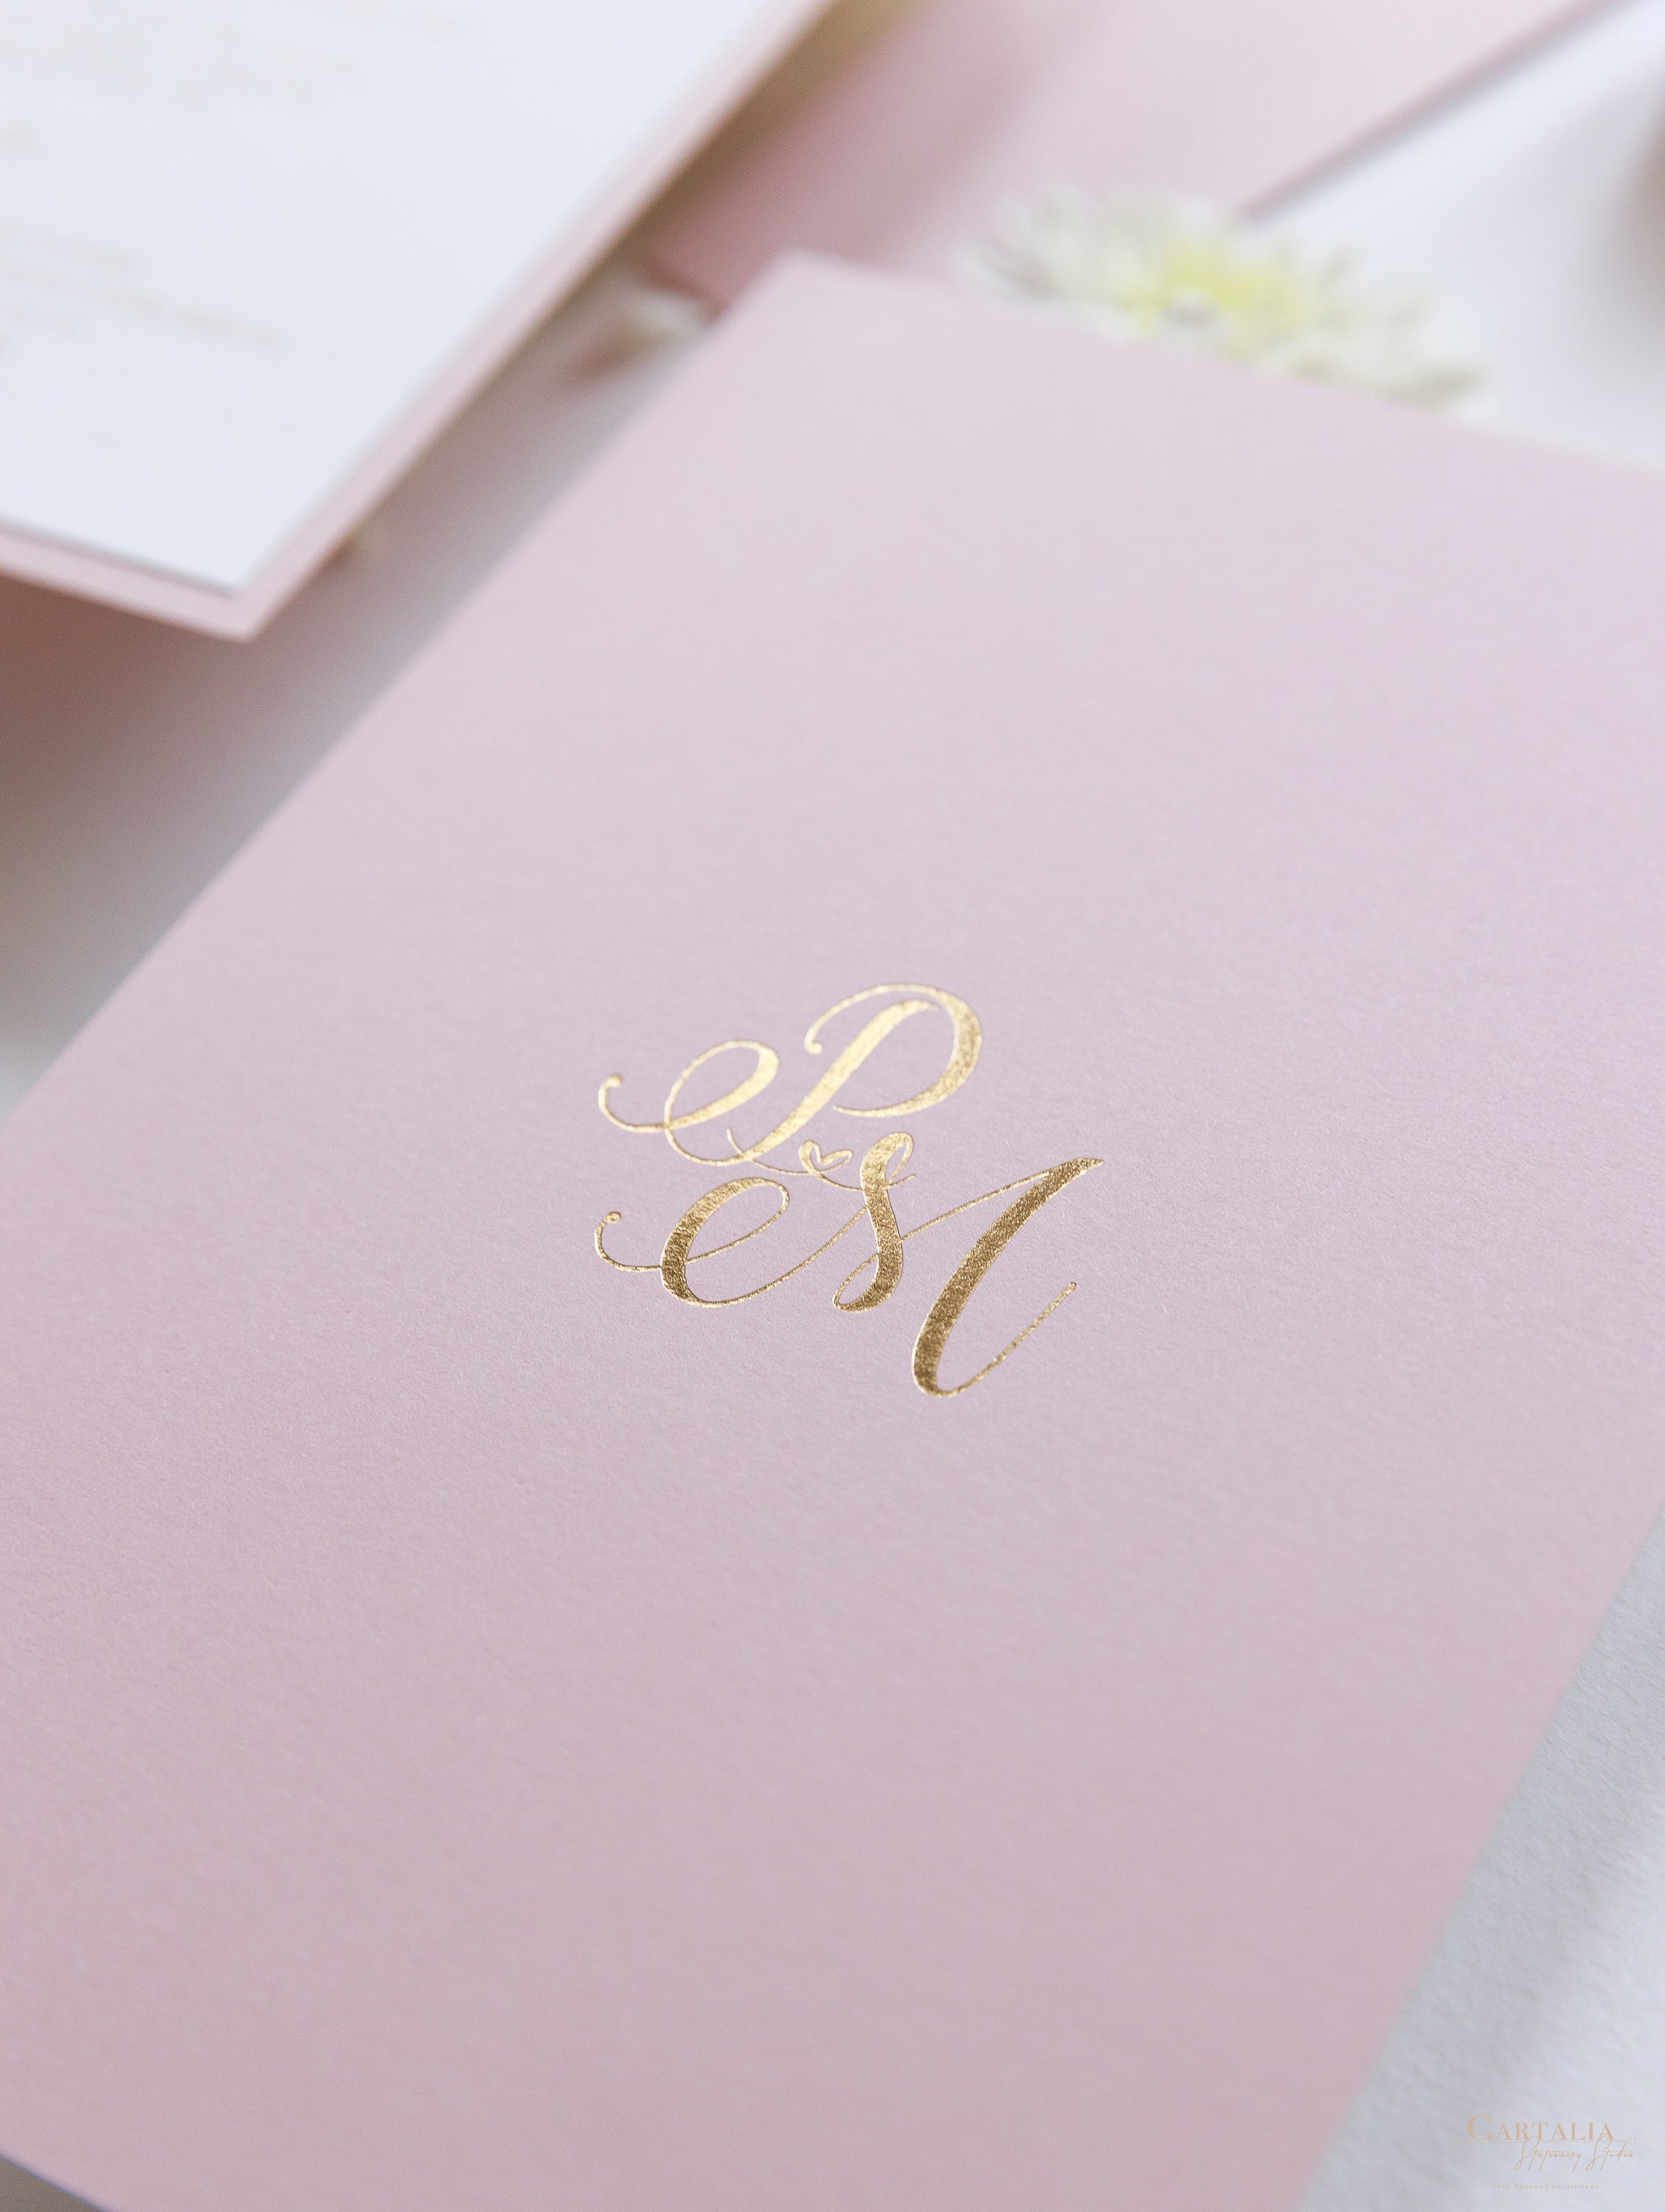 Confetti Dotted Blush Pink Evening Invitation with Gold Foil 